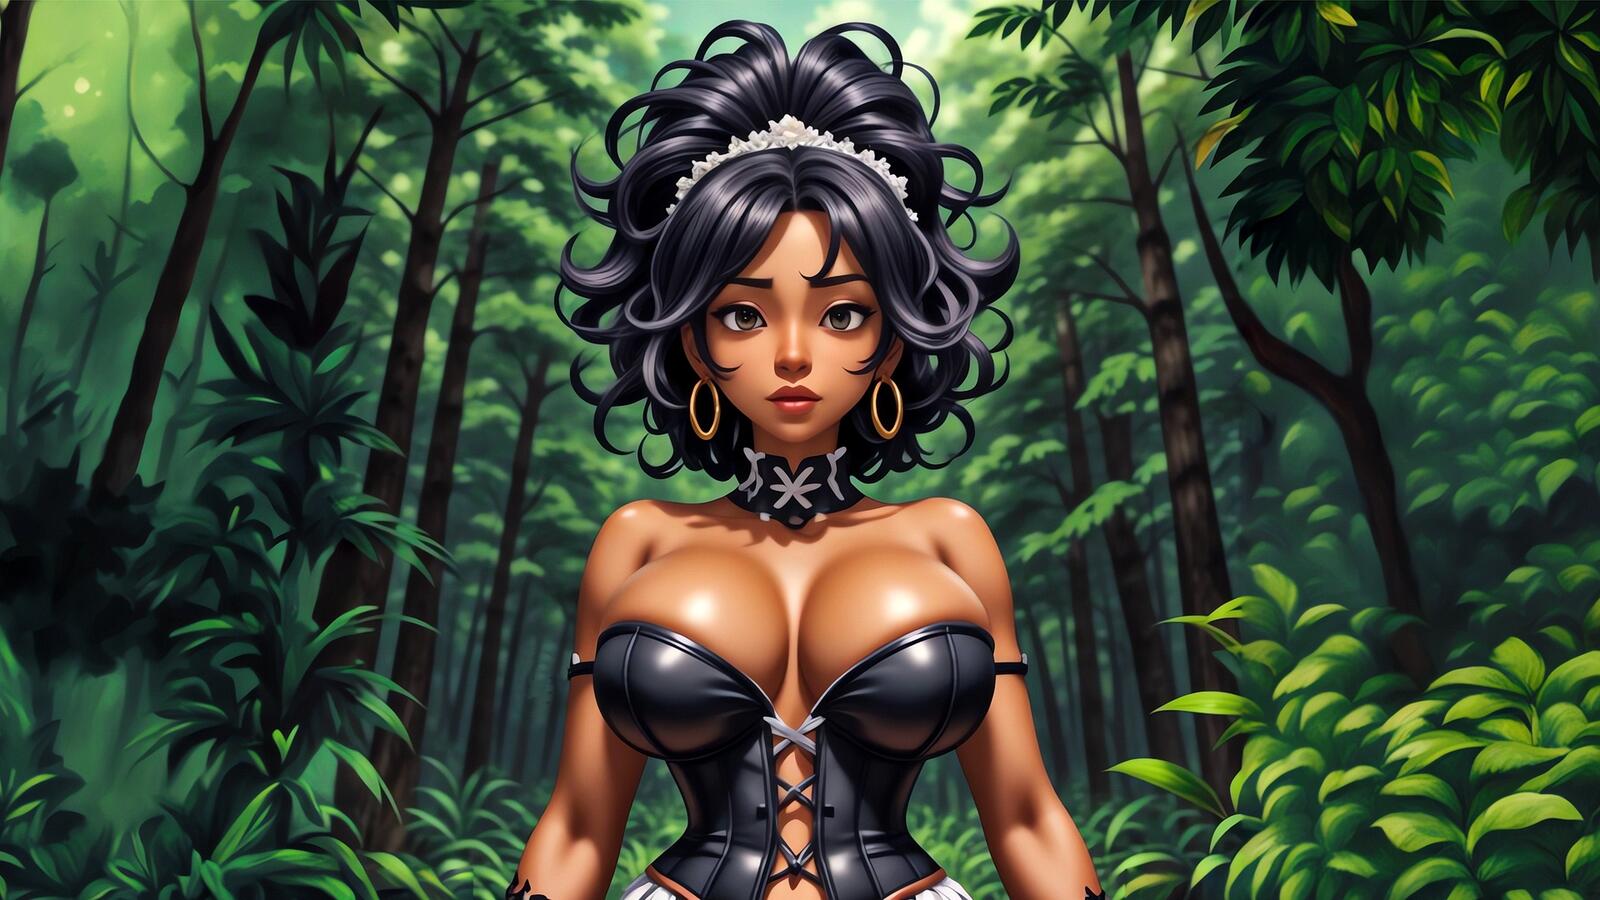 Free photo A black girl in a black corset stands in the background of the forest